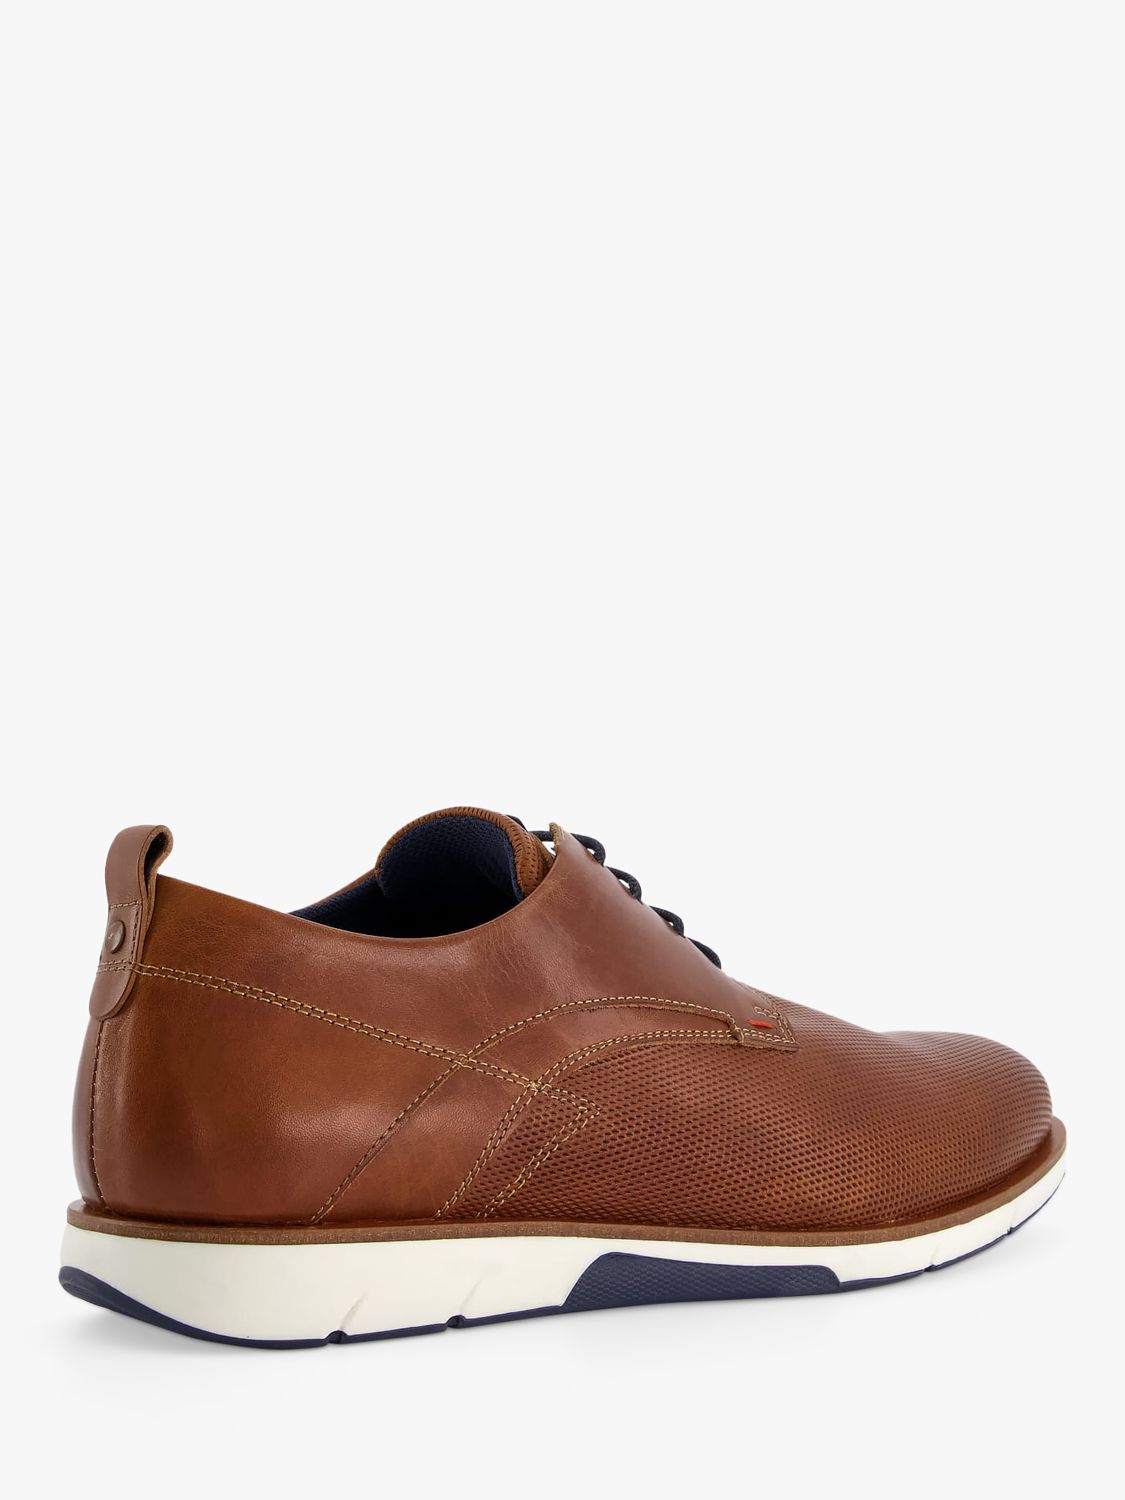 Dune Balad Wide Fit Punch Hole Casual Shoes, Tan at John Lewis & Partners